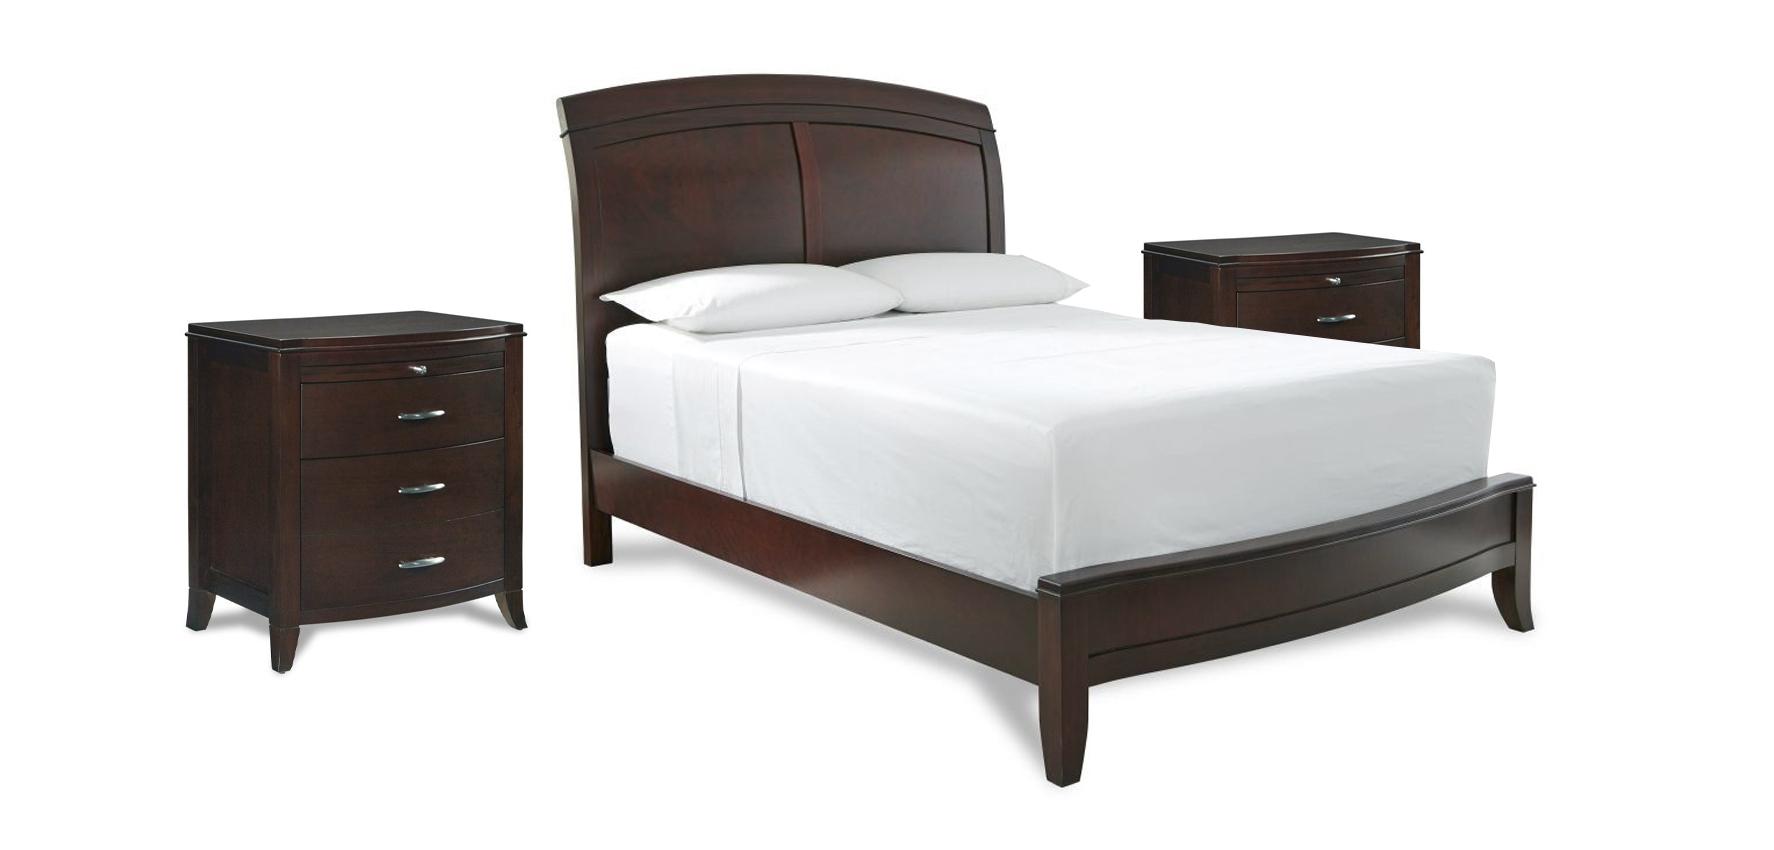 

    
Mahogany Finish Sleigh Queen Bedroom Set 3Pcs BRIGHTON by Modus Furniture
